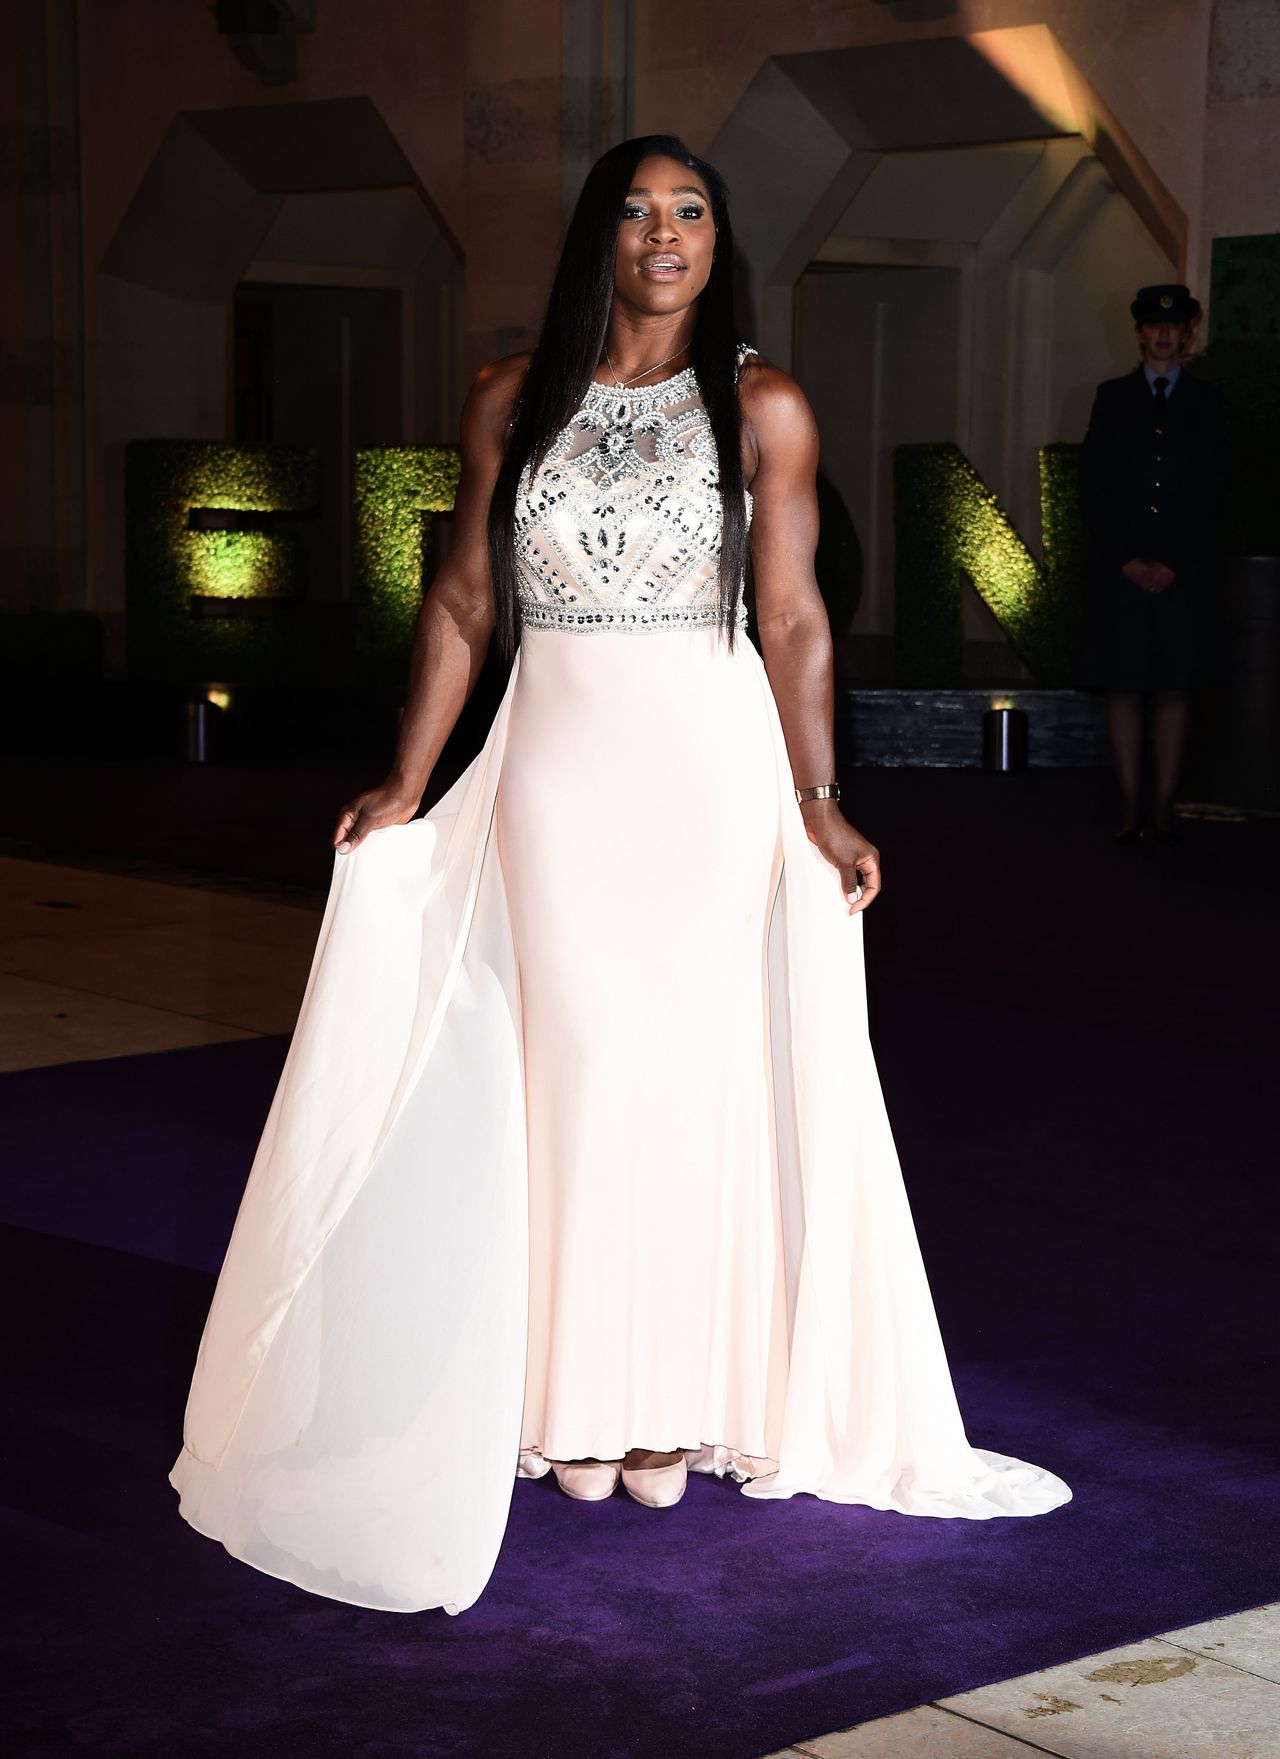 LONDON, ENGLAND - JULY 12: Serena Williams attends the Wimbledon Champions Dinner at The Guildhall on July 12, 2015 in London, England. (Photo by Stuart C. Wilson/Getty Images)